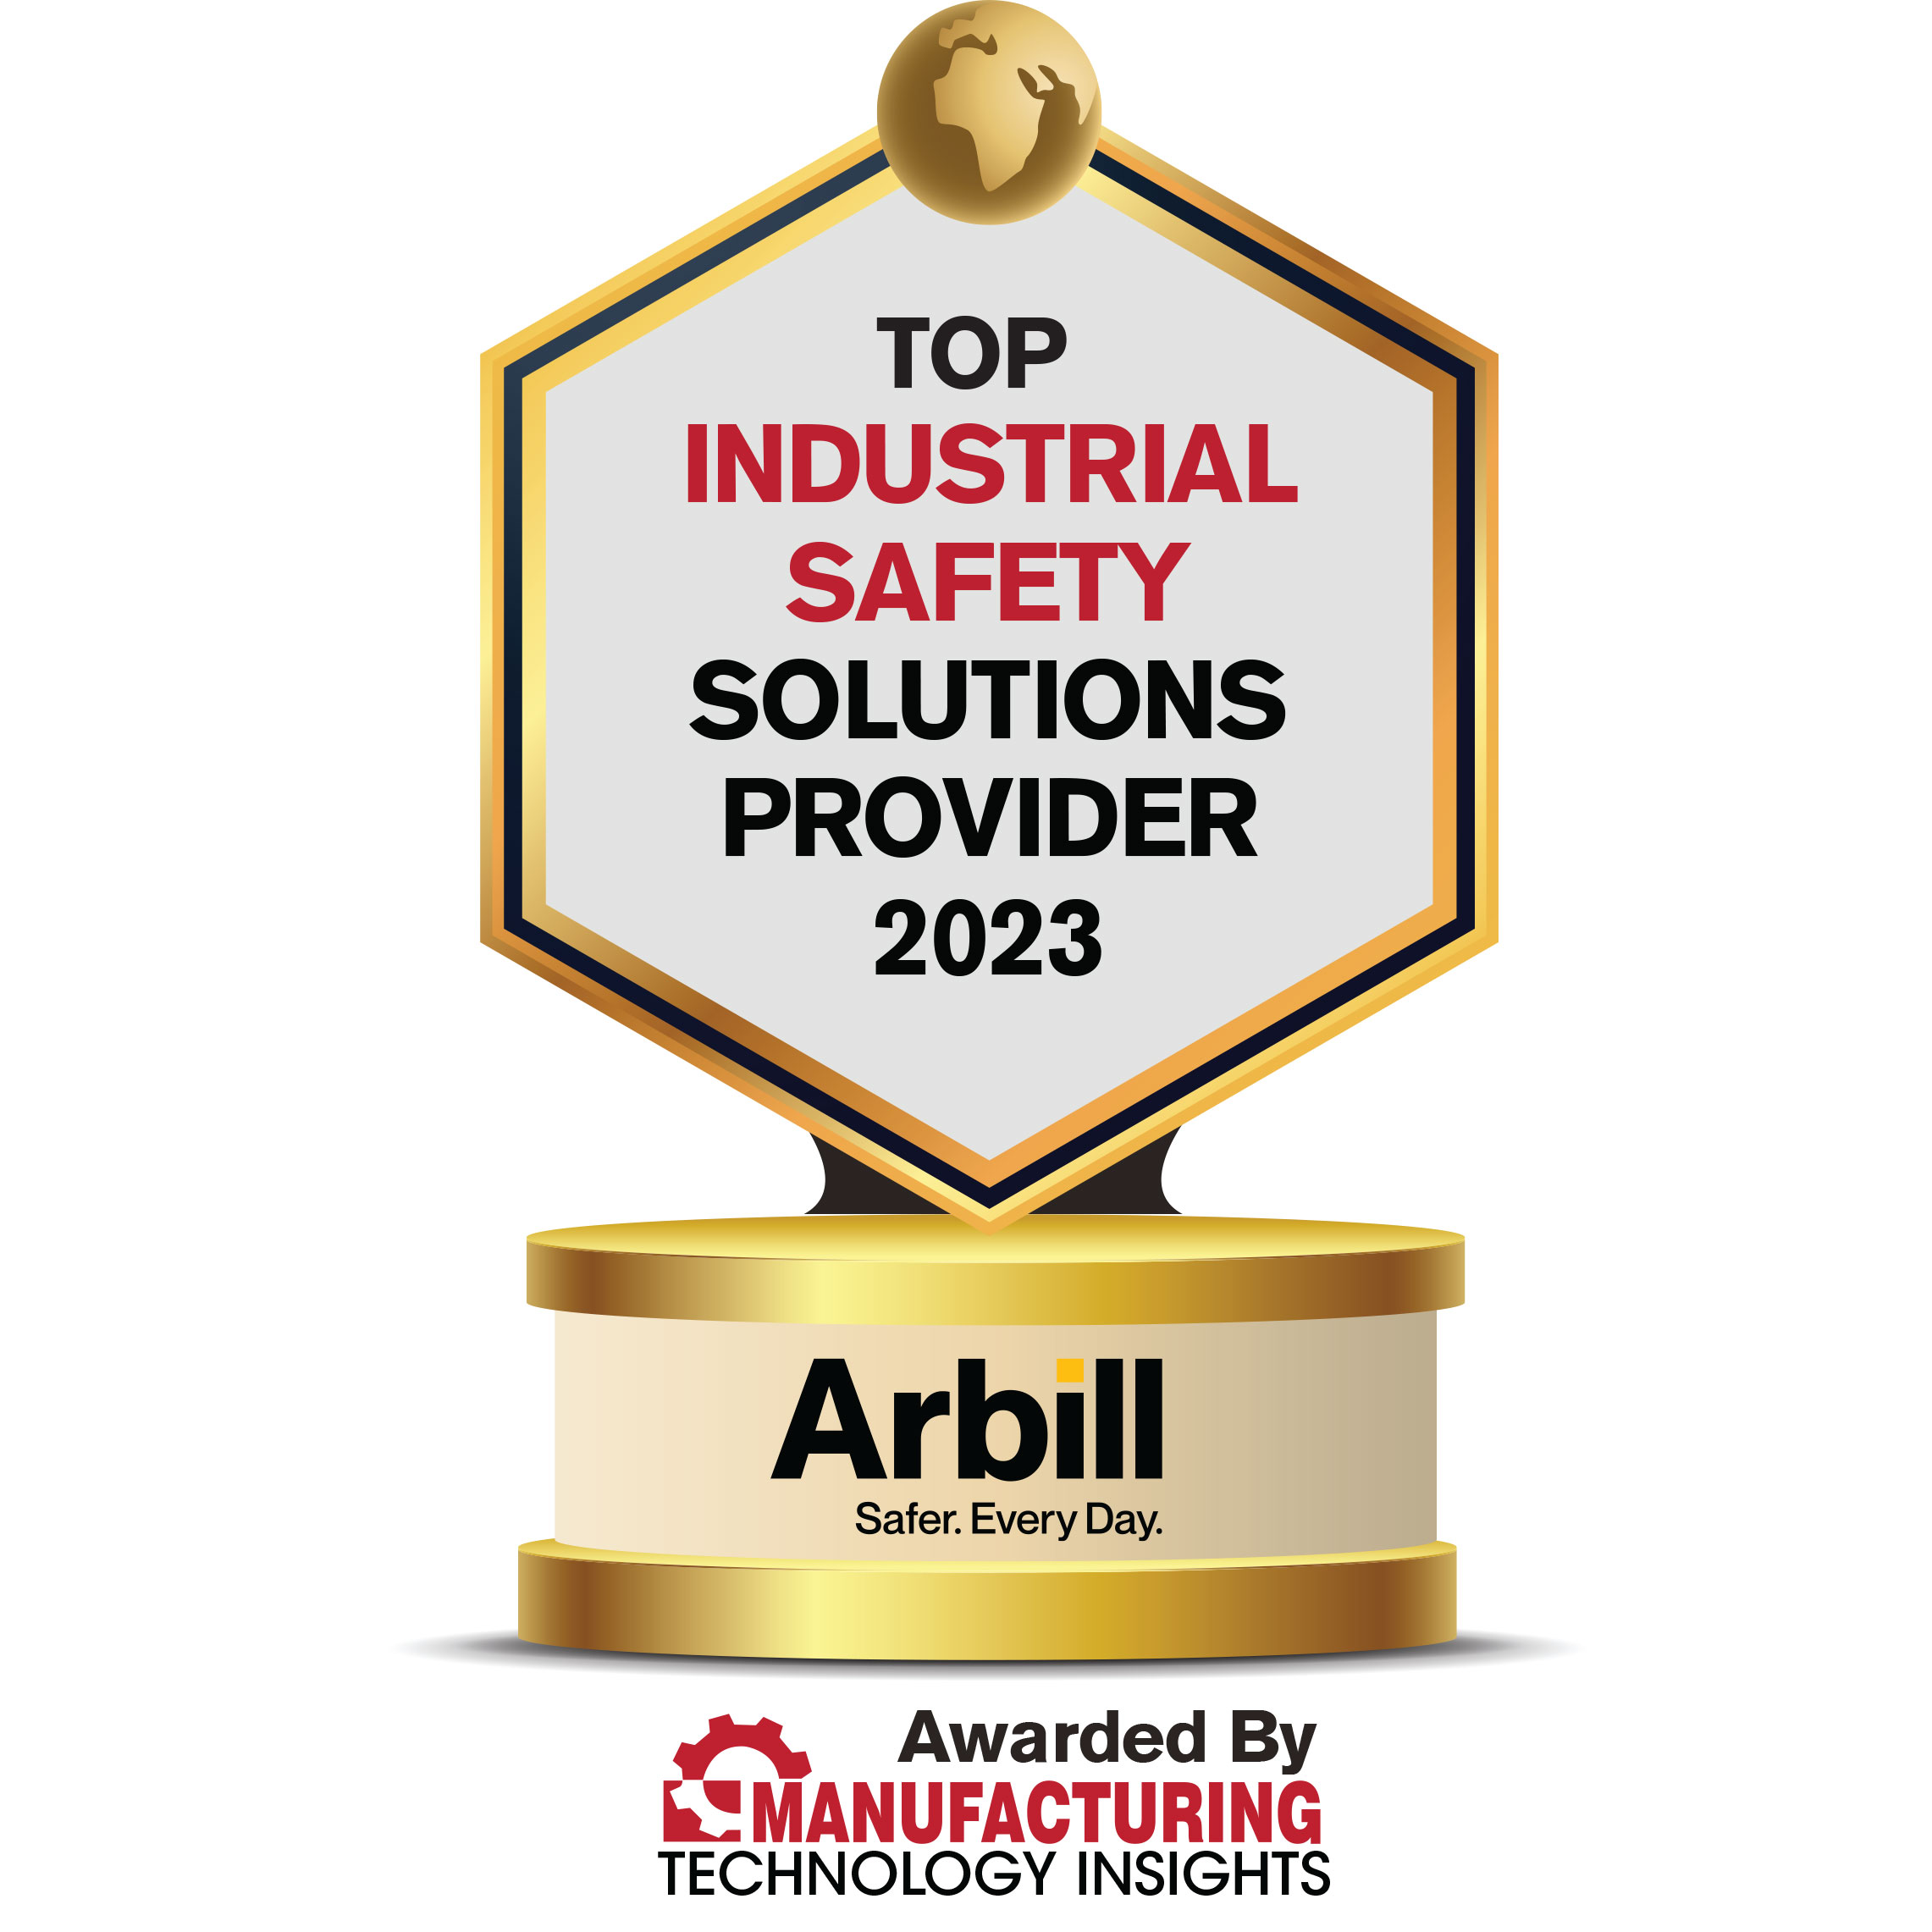 Arbill Named Top Industrial Safety Solutions Provider by Manufacturing Technology Insights